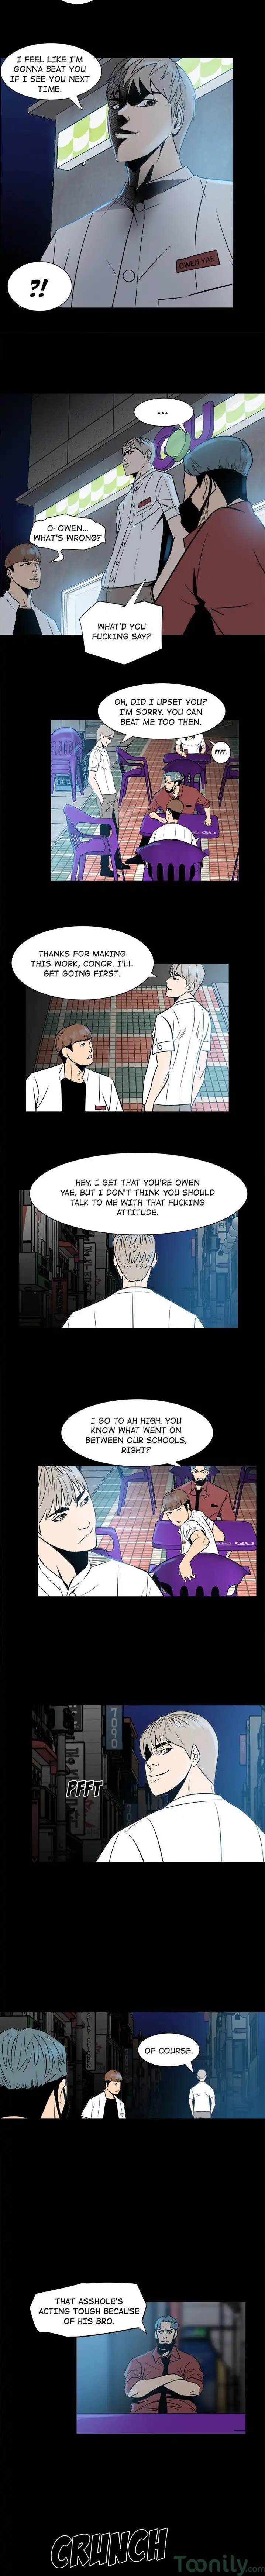 The Villain - Chapter 6 Page 6